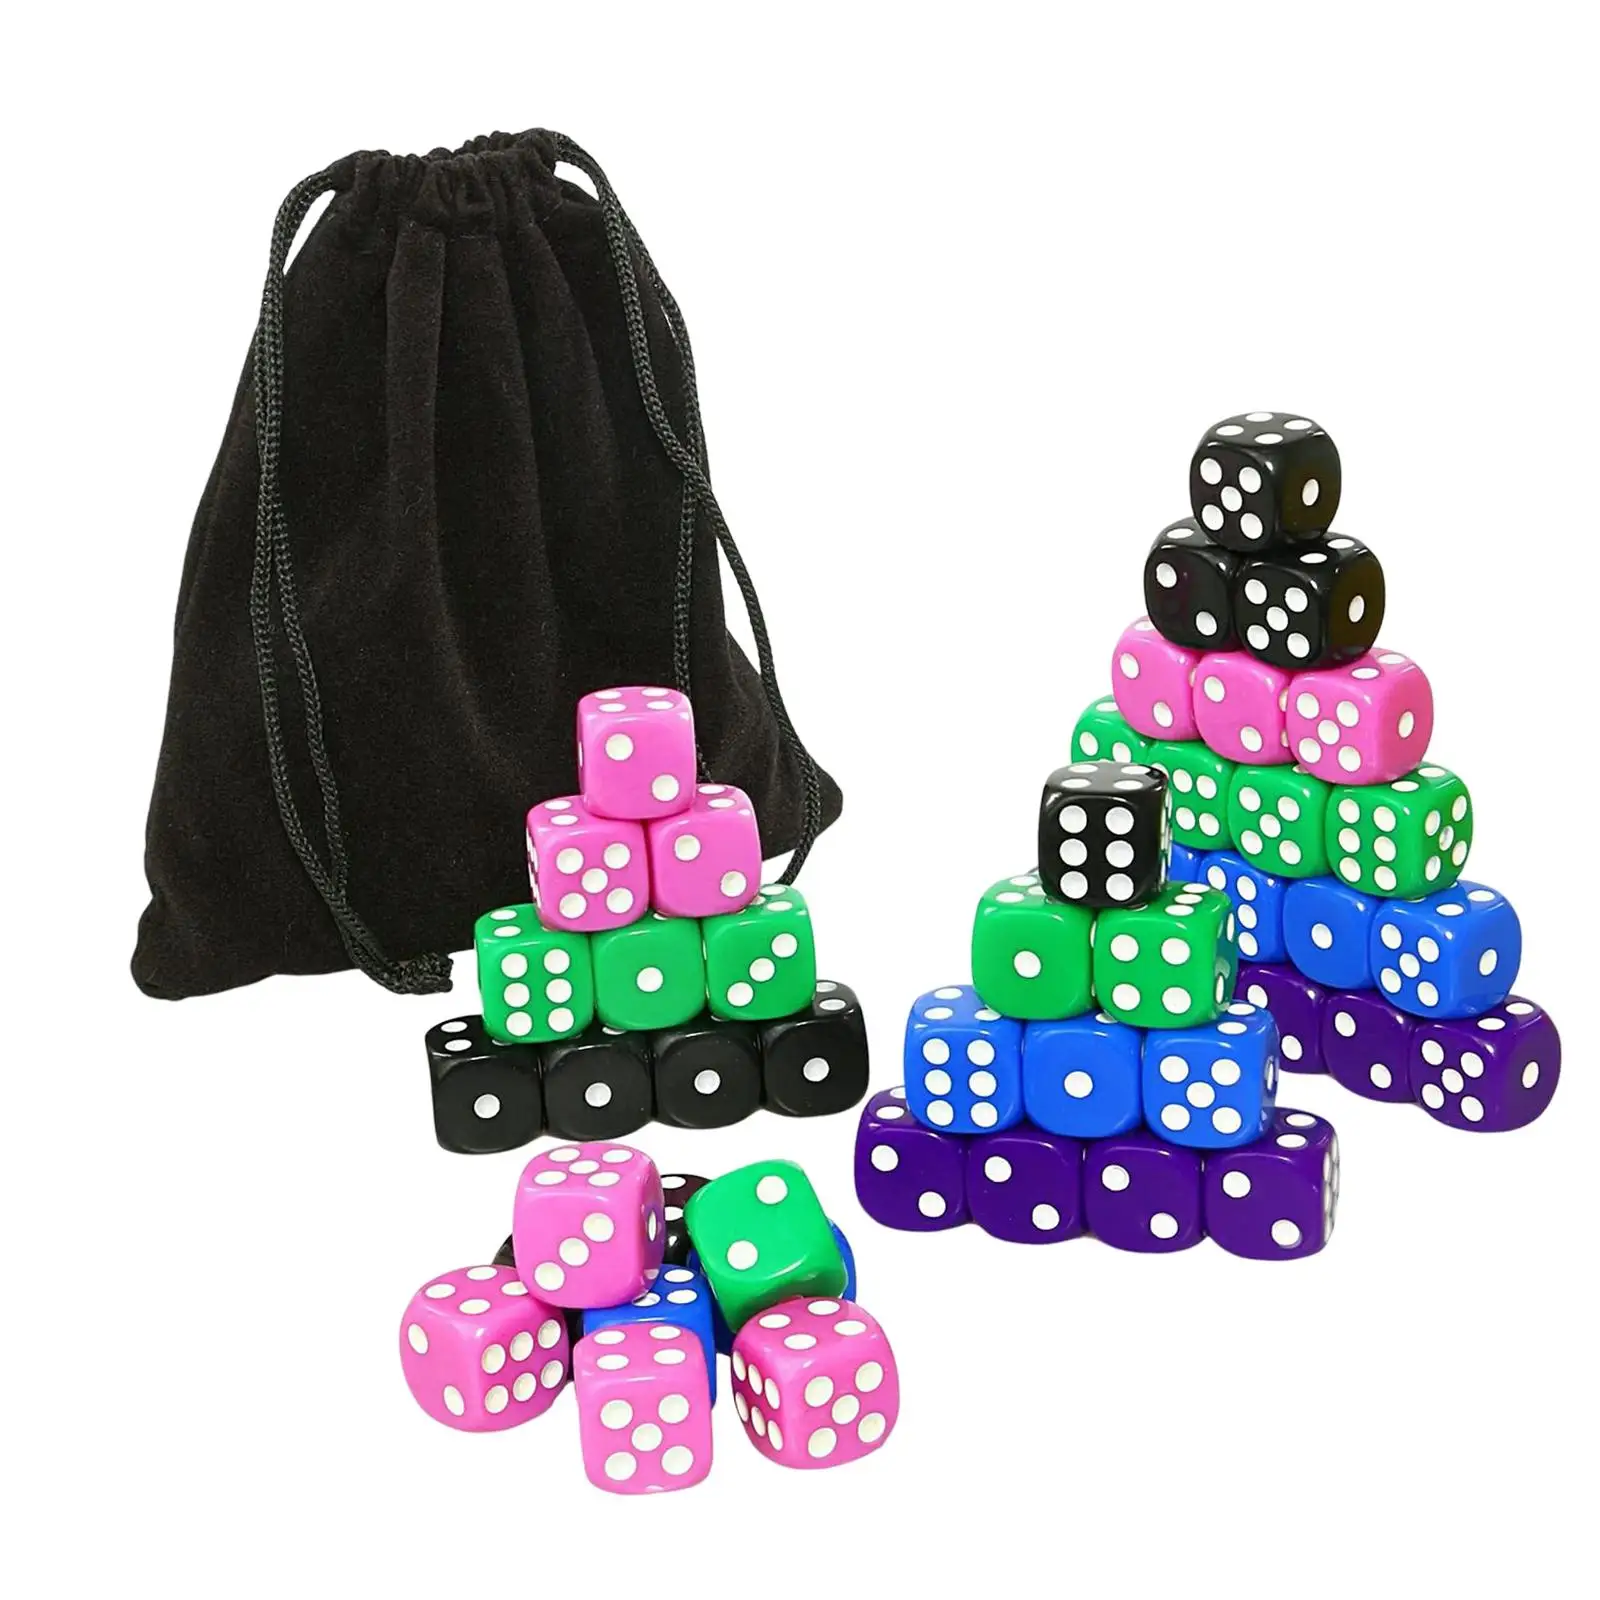 50pcs D6 6 Sided Dice Set with Drawstring Dice Bag for MTG RPG Bar Toys, 16mm Acrylic Dice, Table Games, Role Playing Games